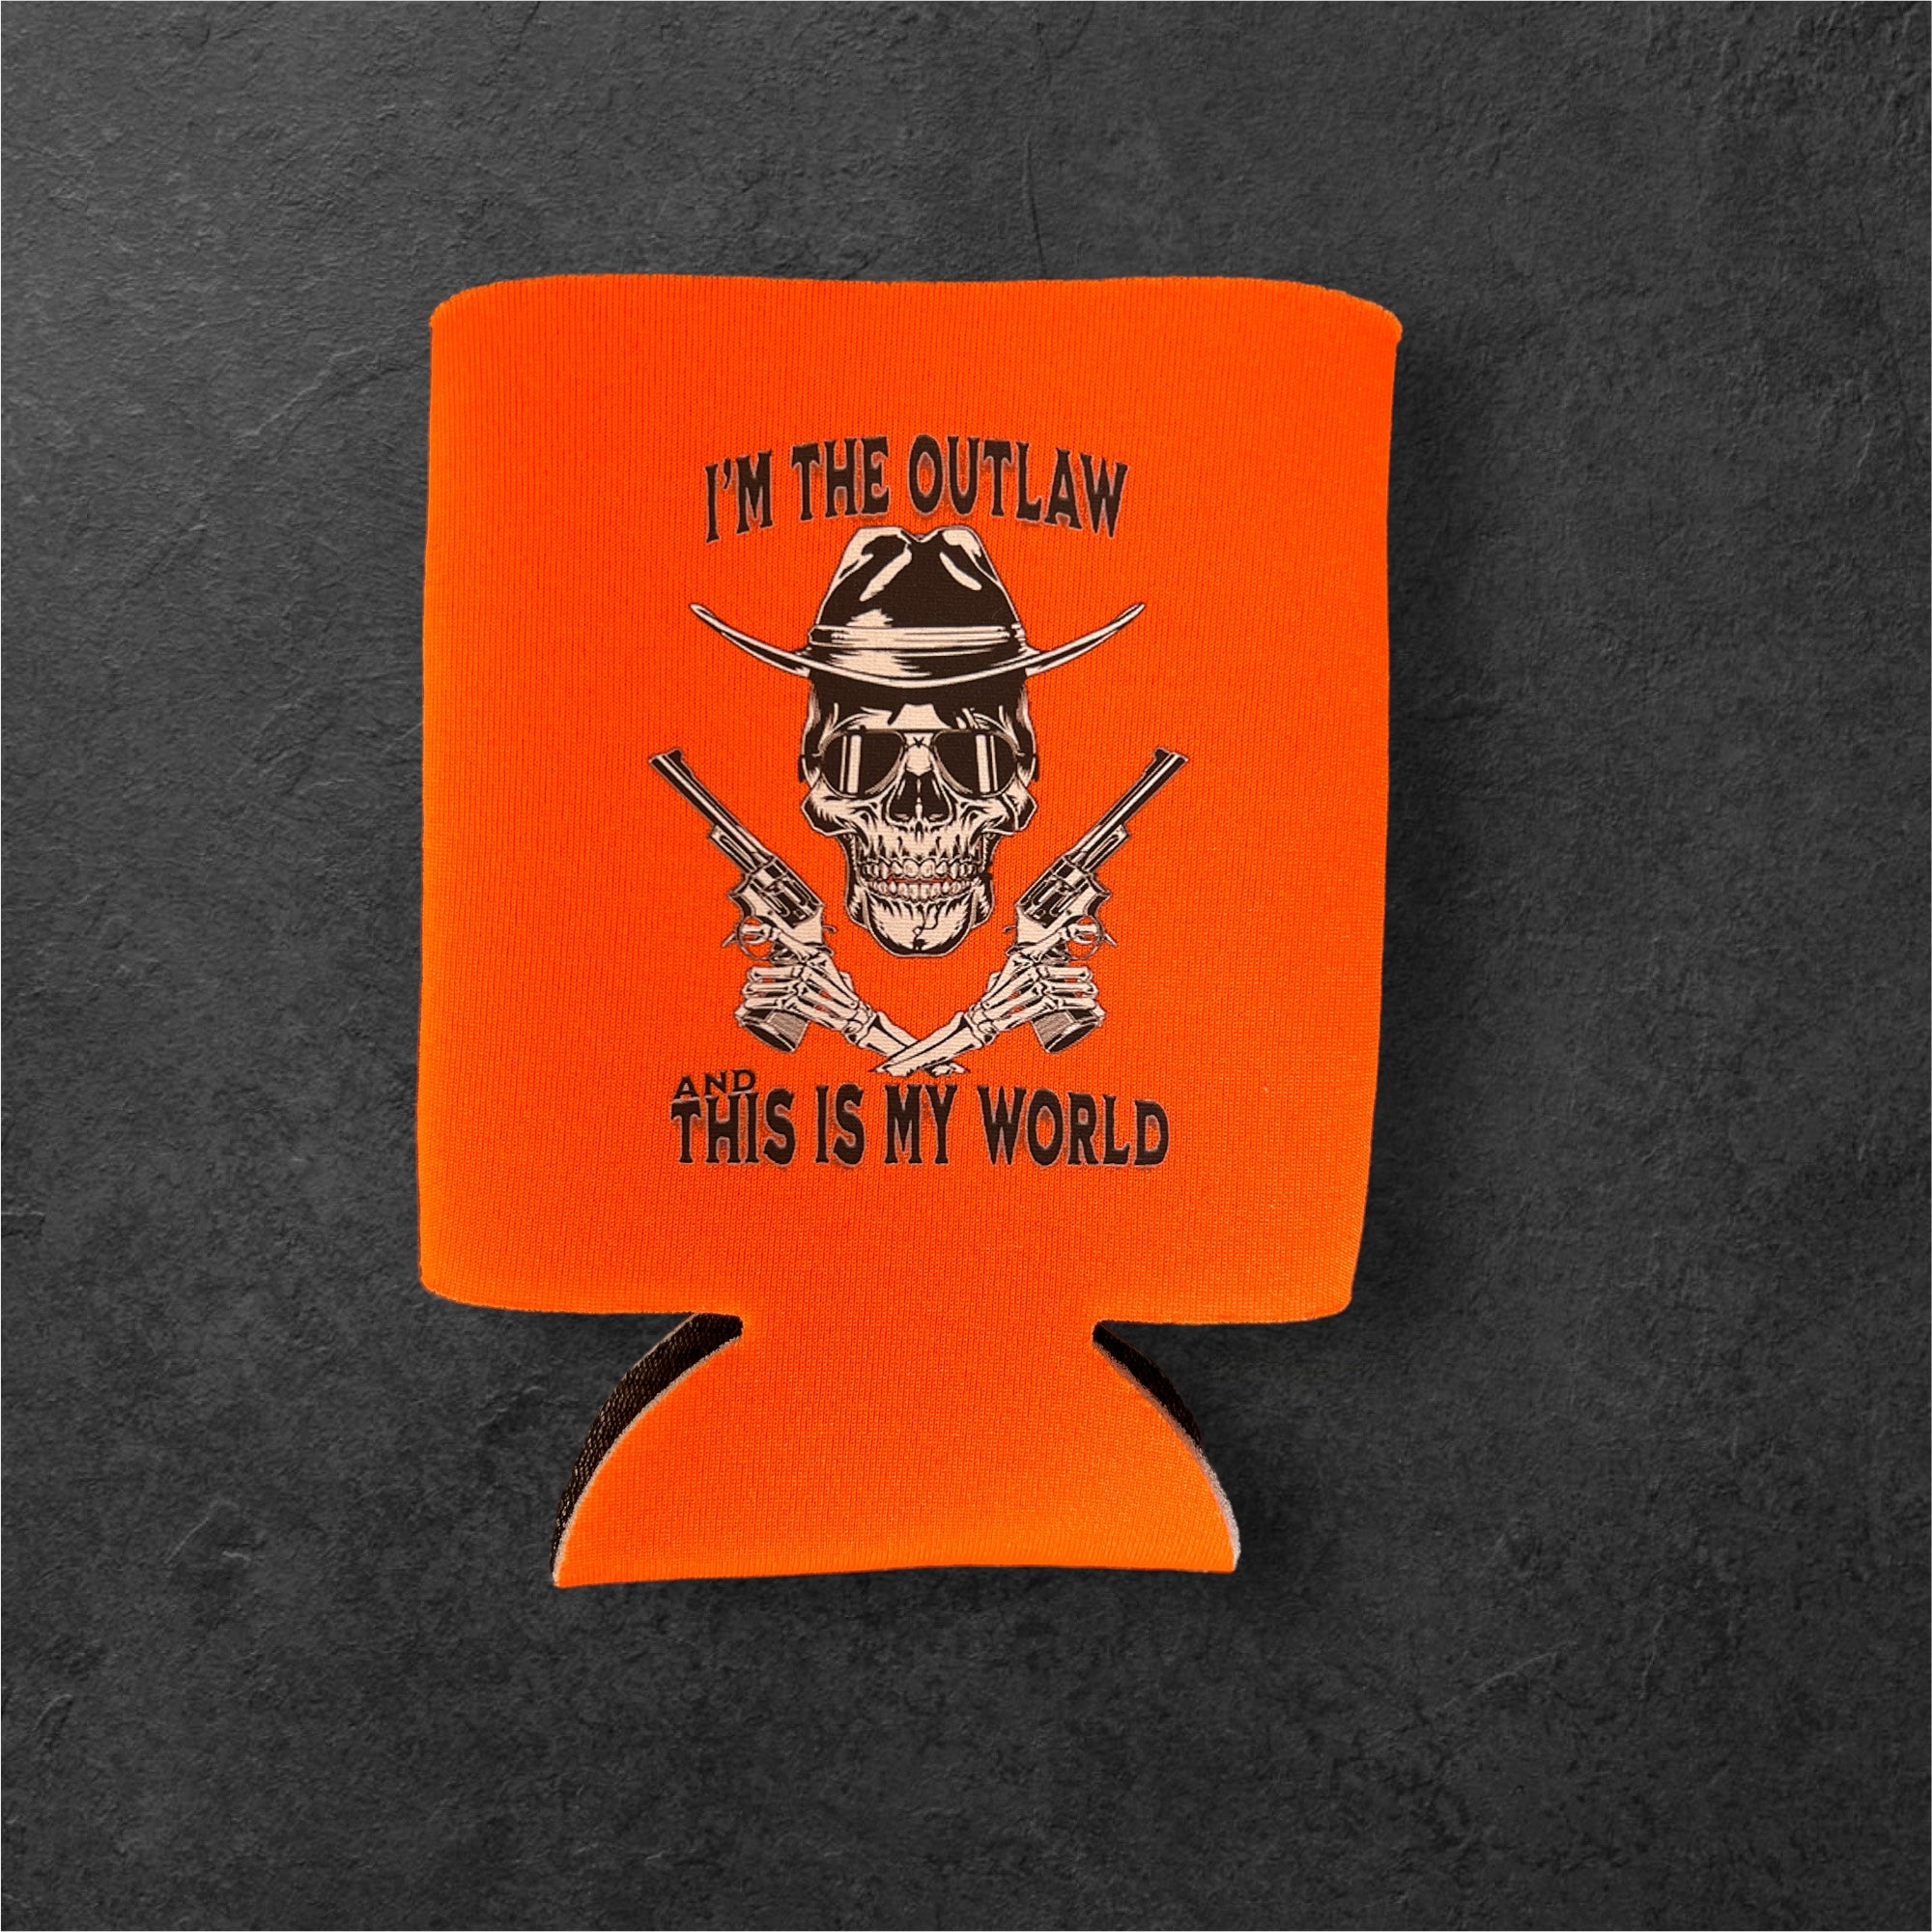 I'm The Outlaw and This is My World" Drink Koozie